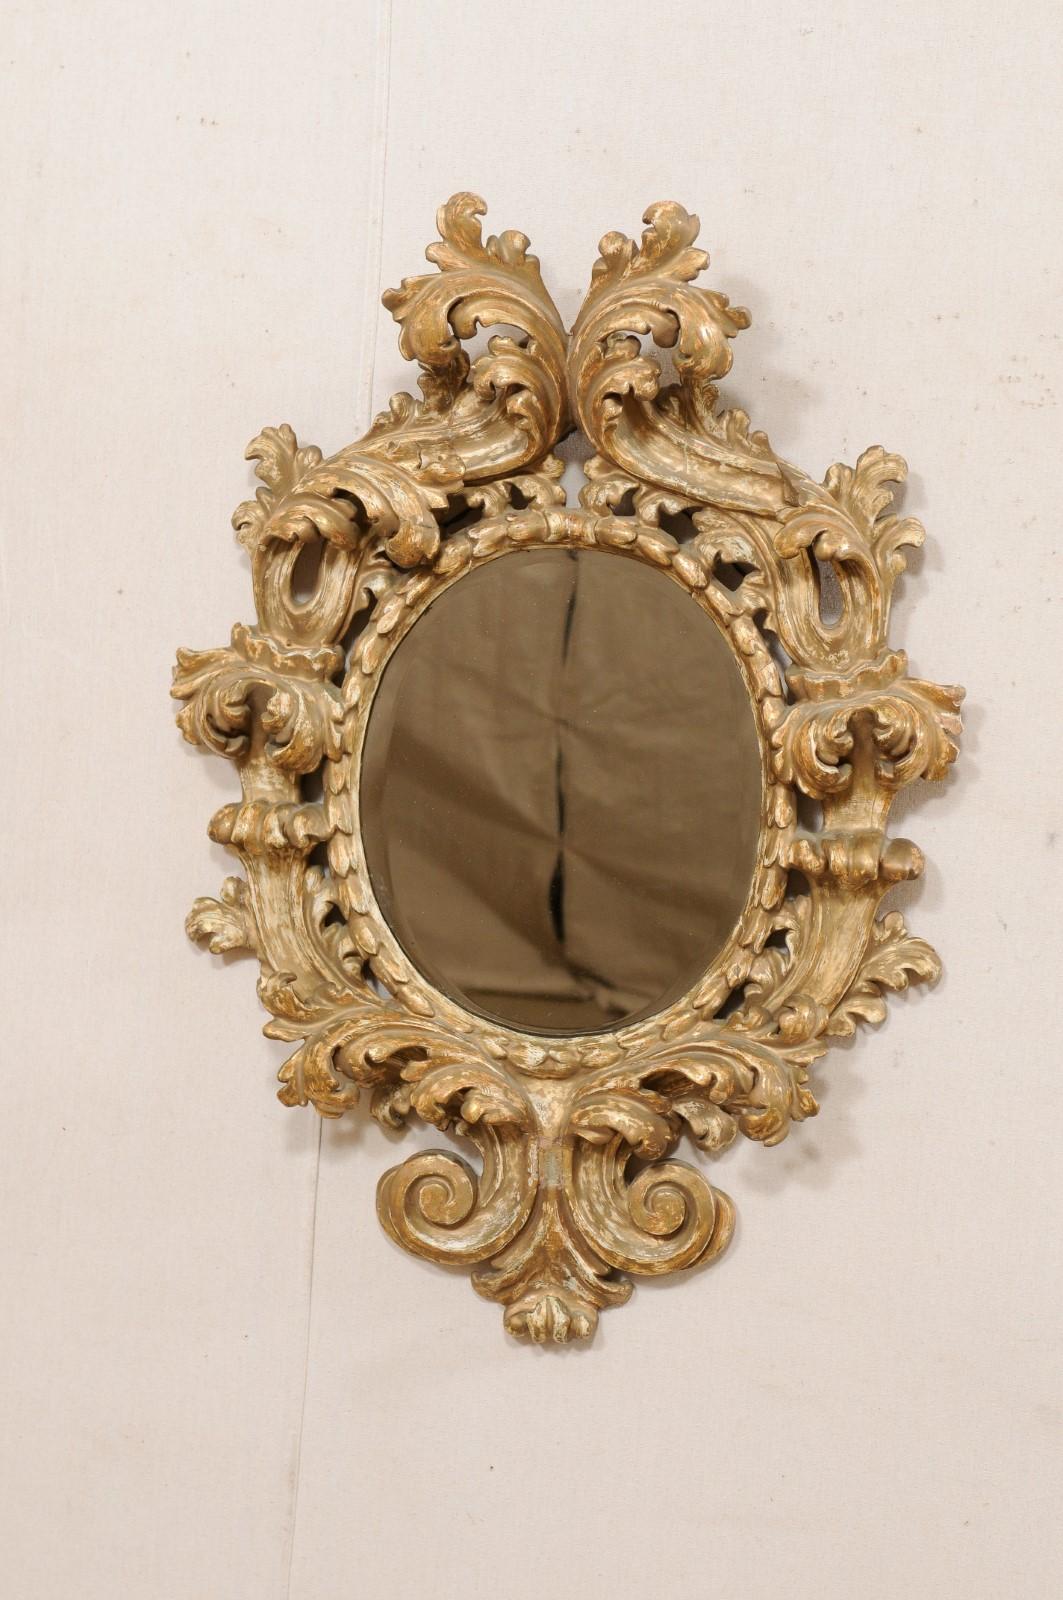 Italian Ornate Acanthus-Carved Mirror w/Oblong, Oval-Shaped Glass, 18th/19th C. In Good Condition For Sale In Atlanta, GA